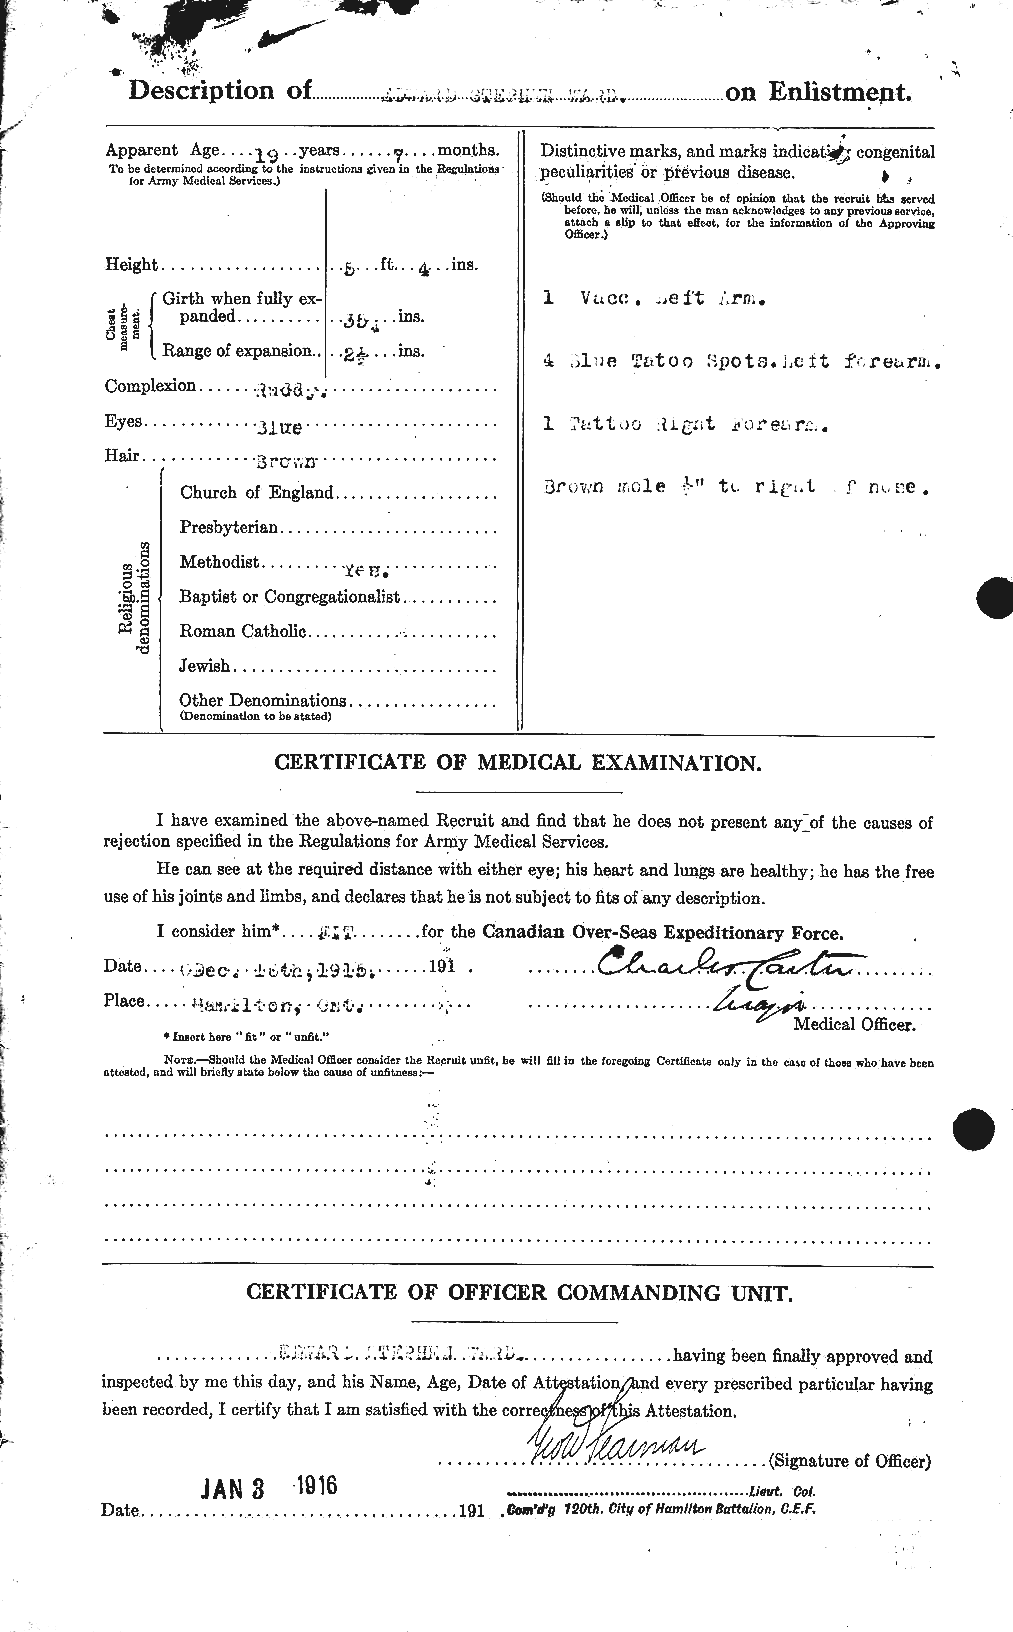 Personnel Records of the First World War - CEF 657656b